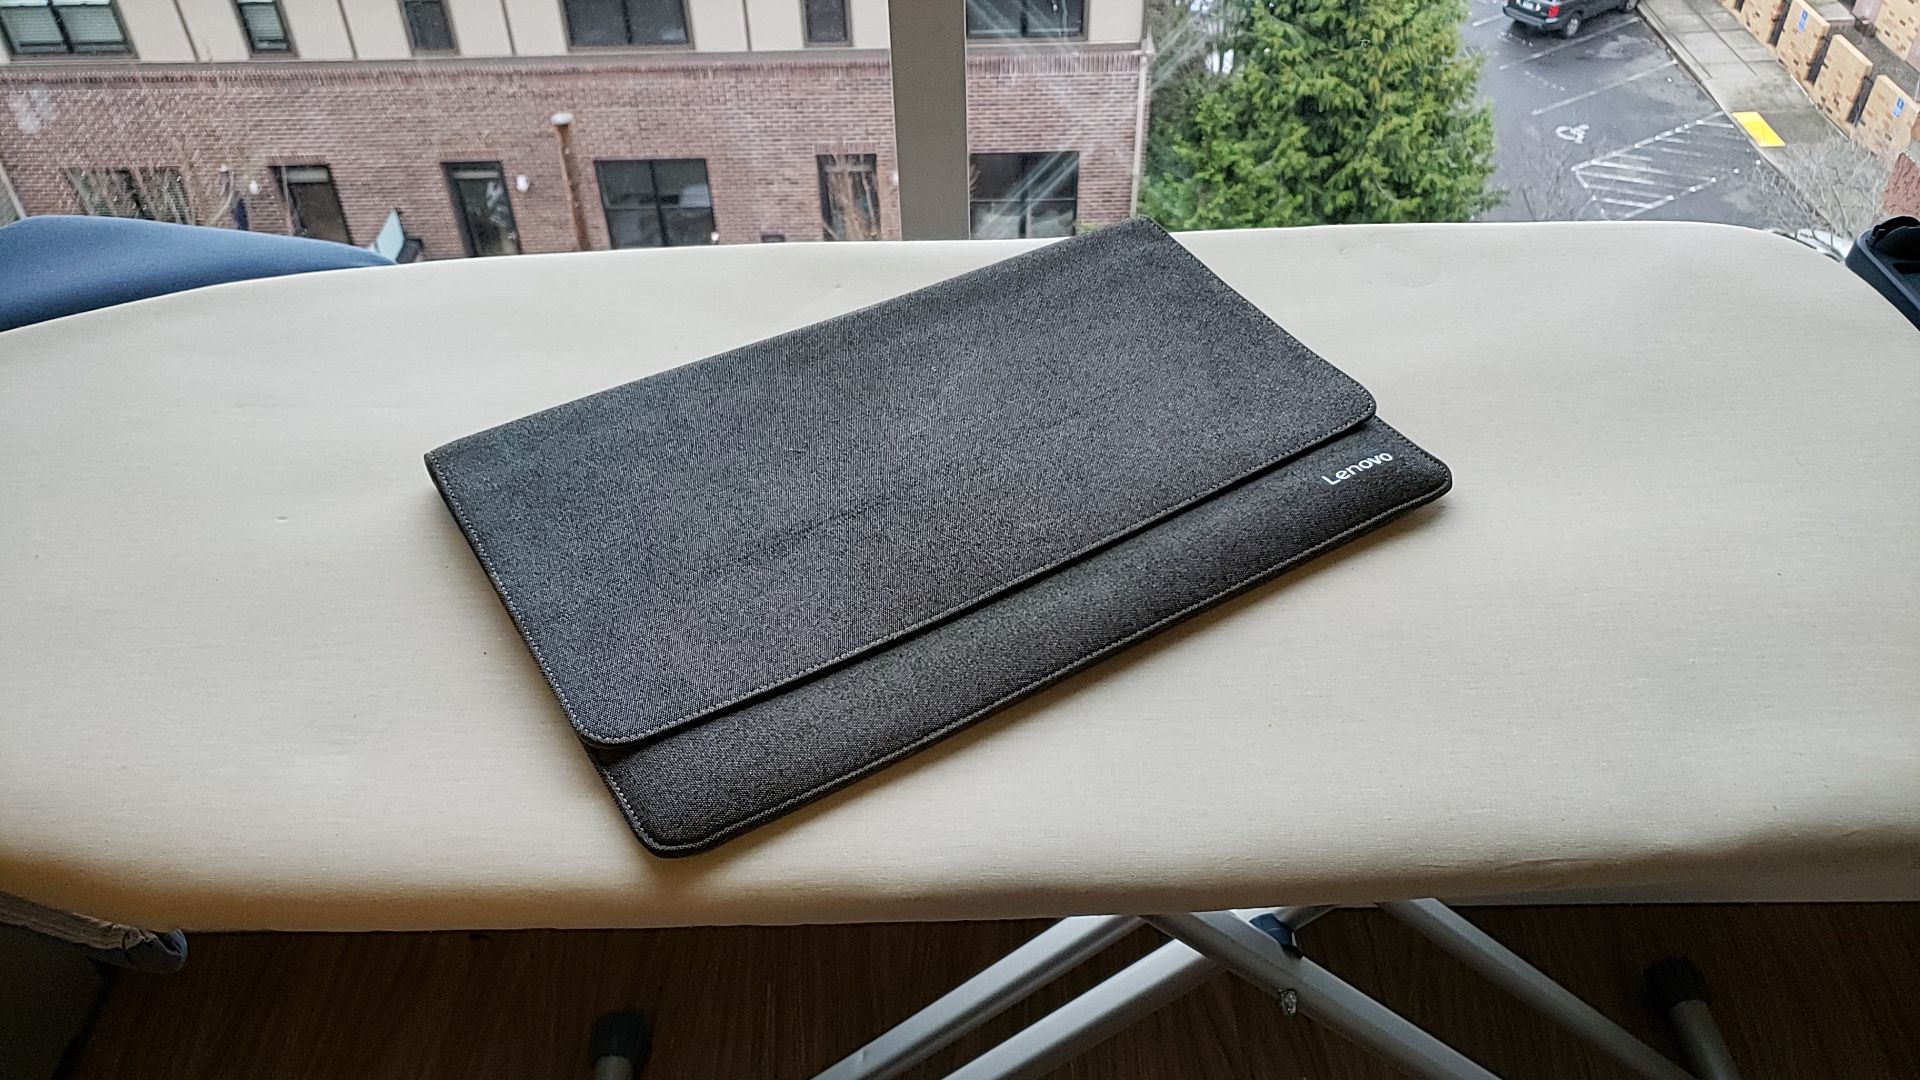 Lenovo Laptop or Yoga Slim Sleeve for up to 15" Laptop